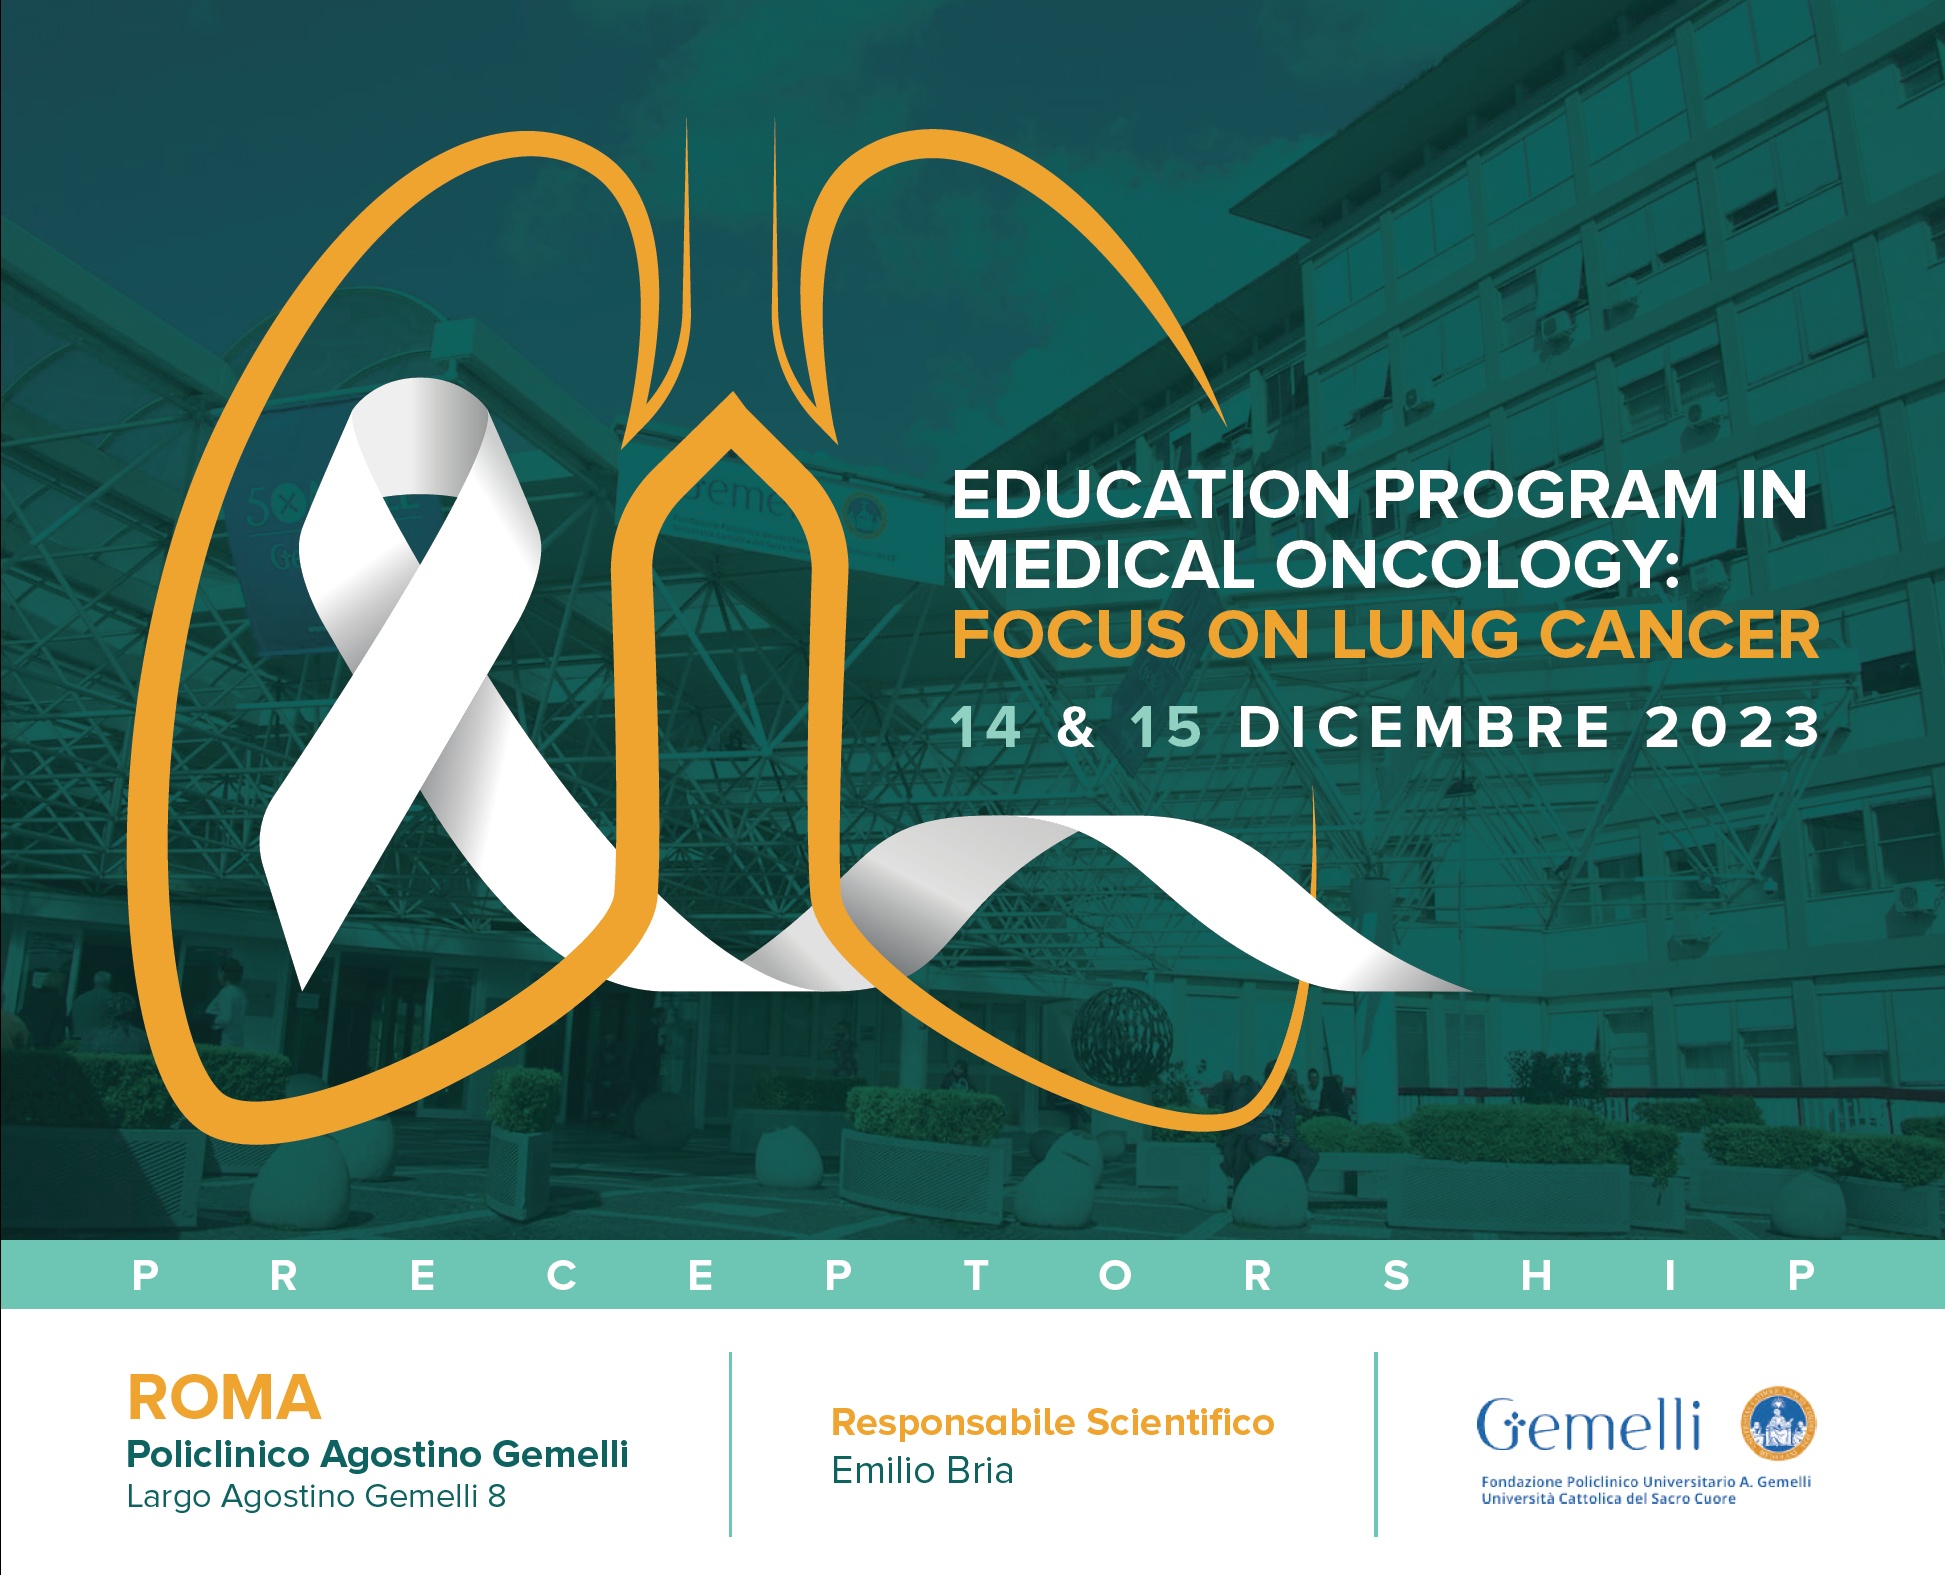 EDUCATION PROGRAM IN MEDICAL ONCOLOGY: FOCUS ON LUNG CANCER